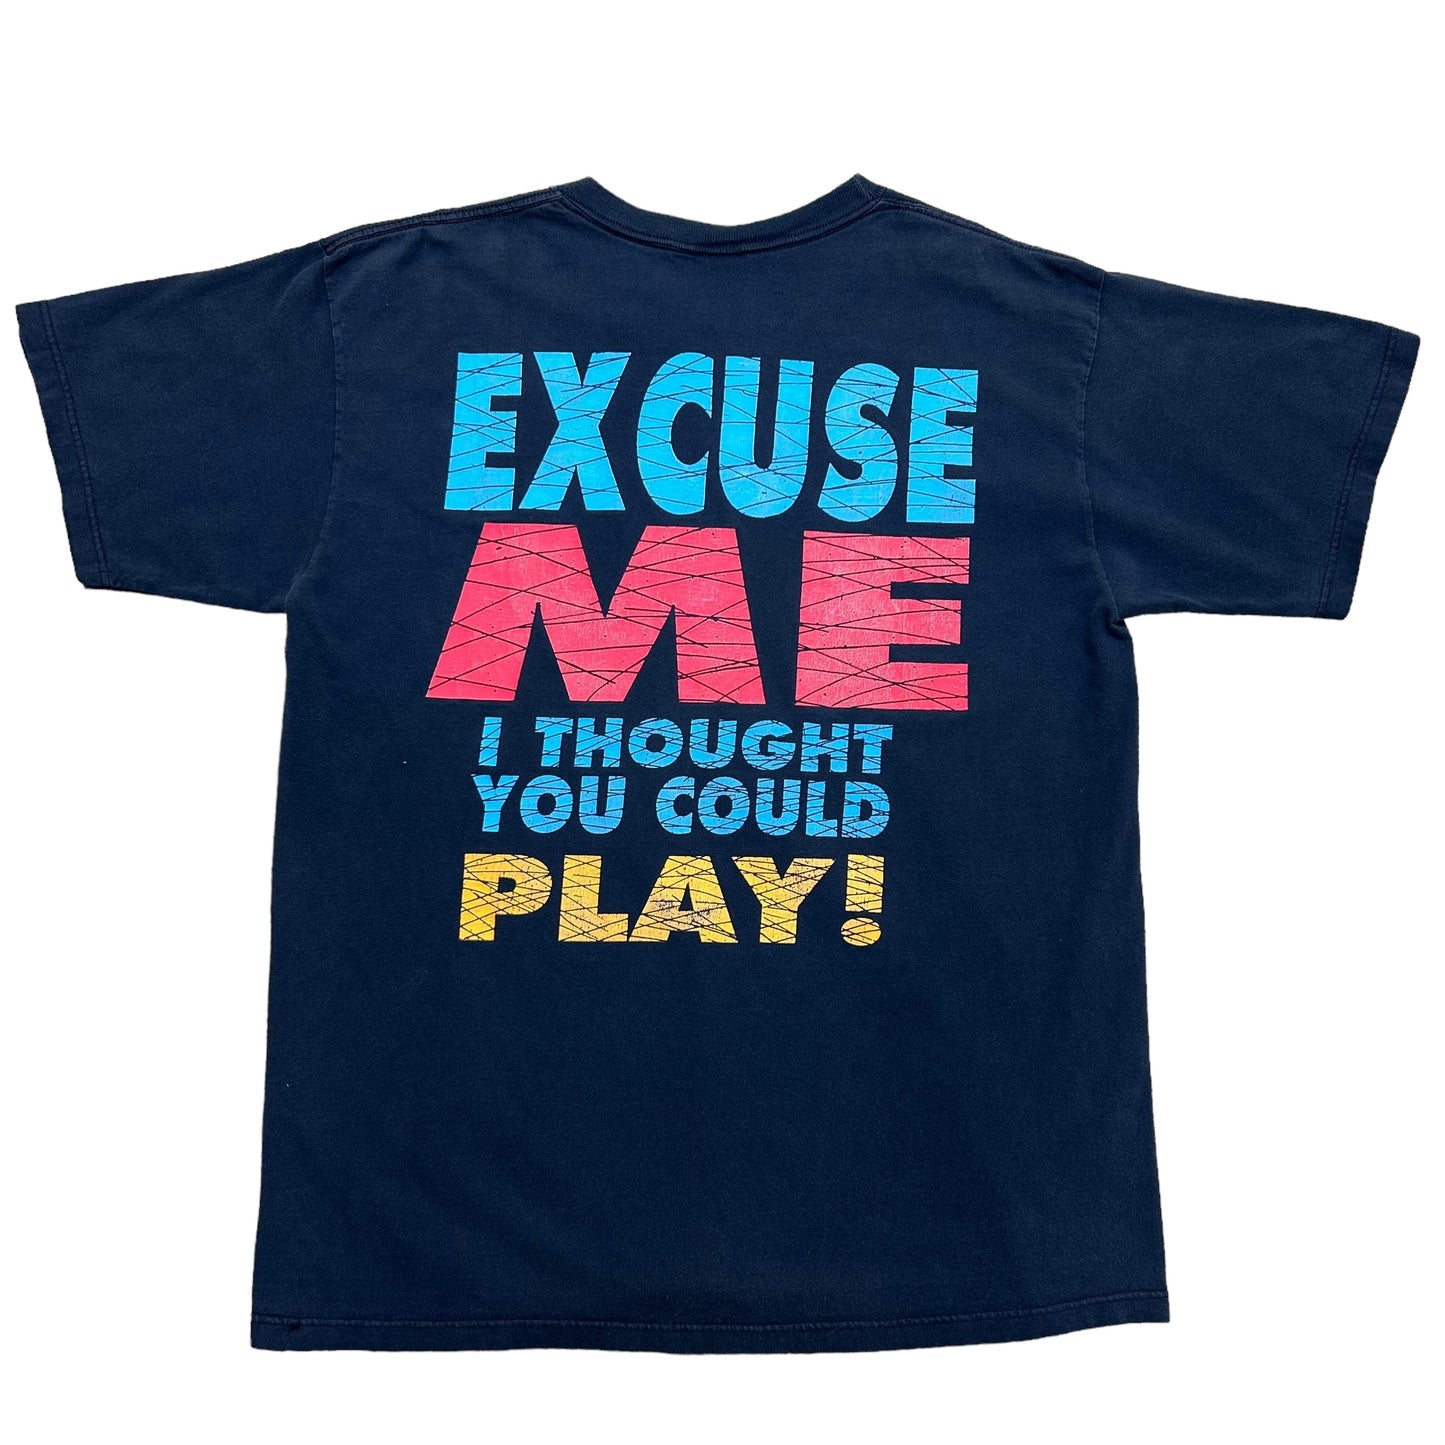 Vintage 1990s Taz “Excuse Me I Thought You Could Play” Navy Blue Graphic T-Shirt - Size XL